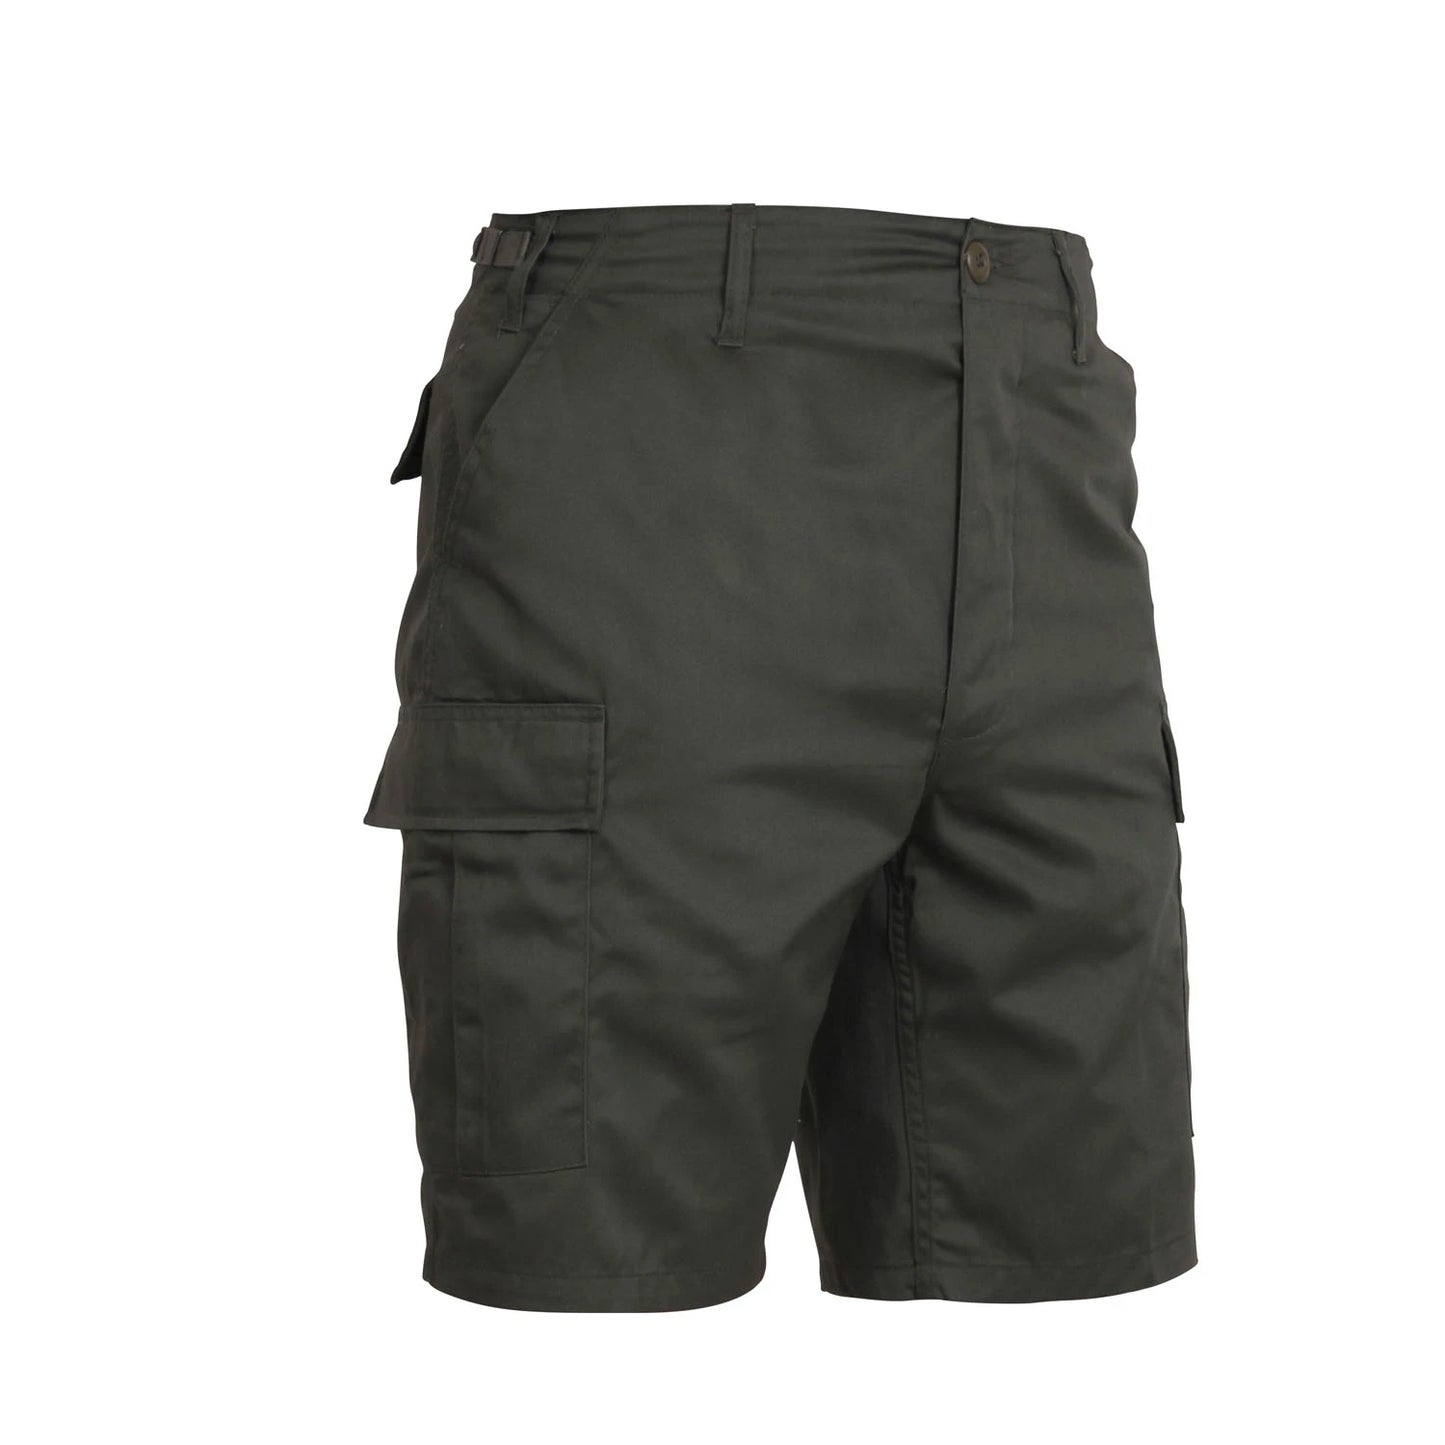 BDU Shorts - Olive Drab Poly/Cotton – Army Navy Marine Store